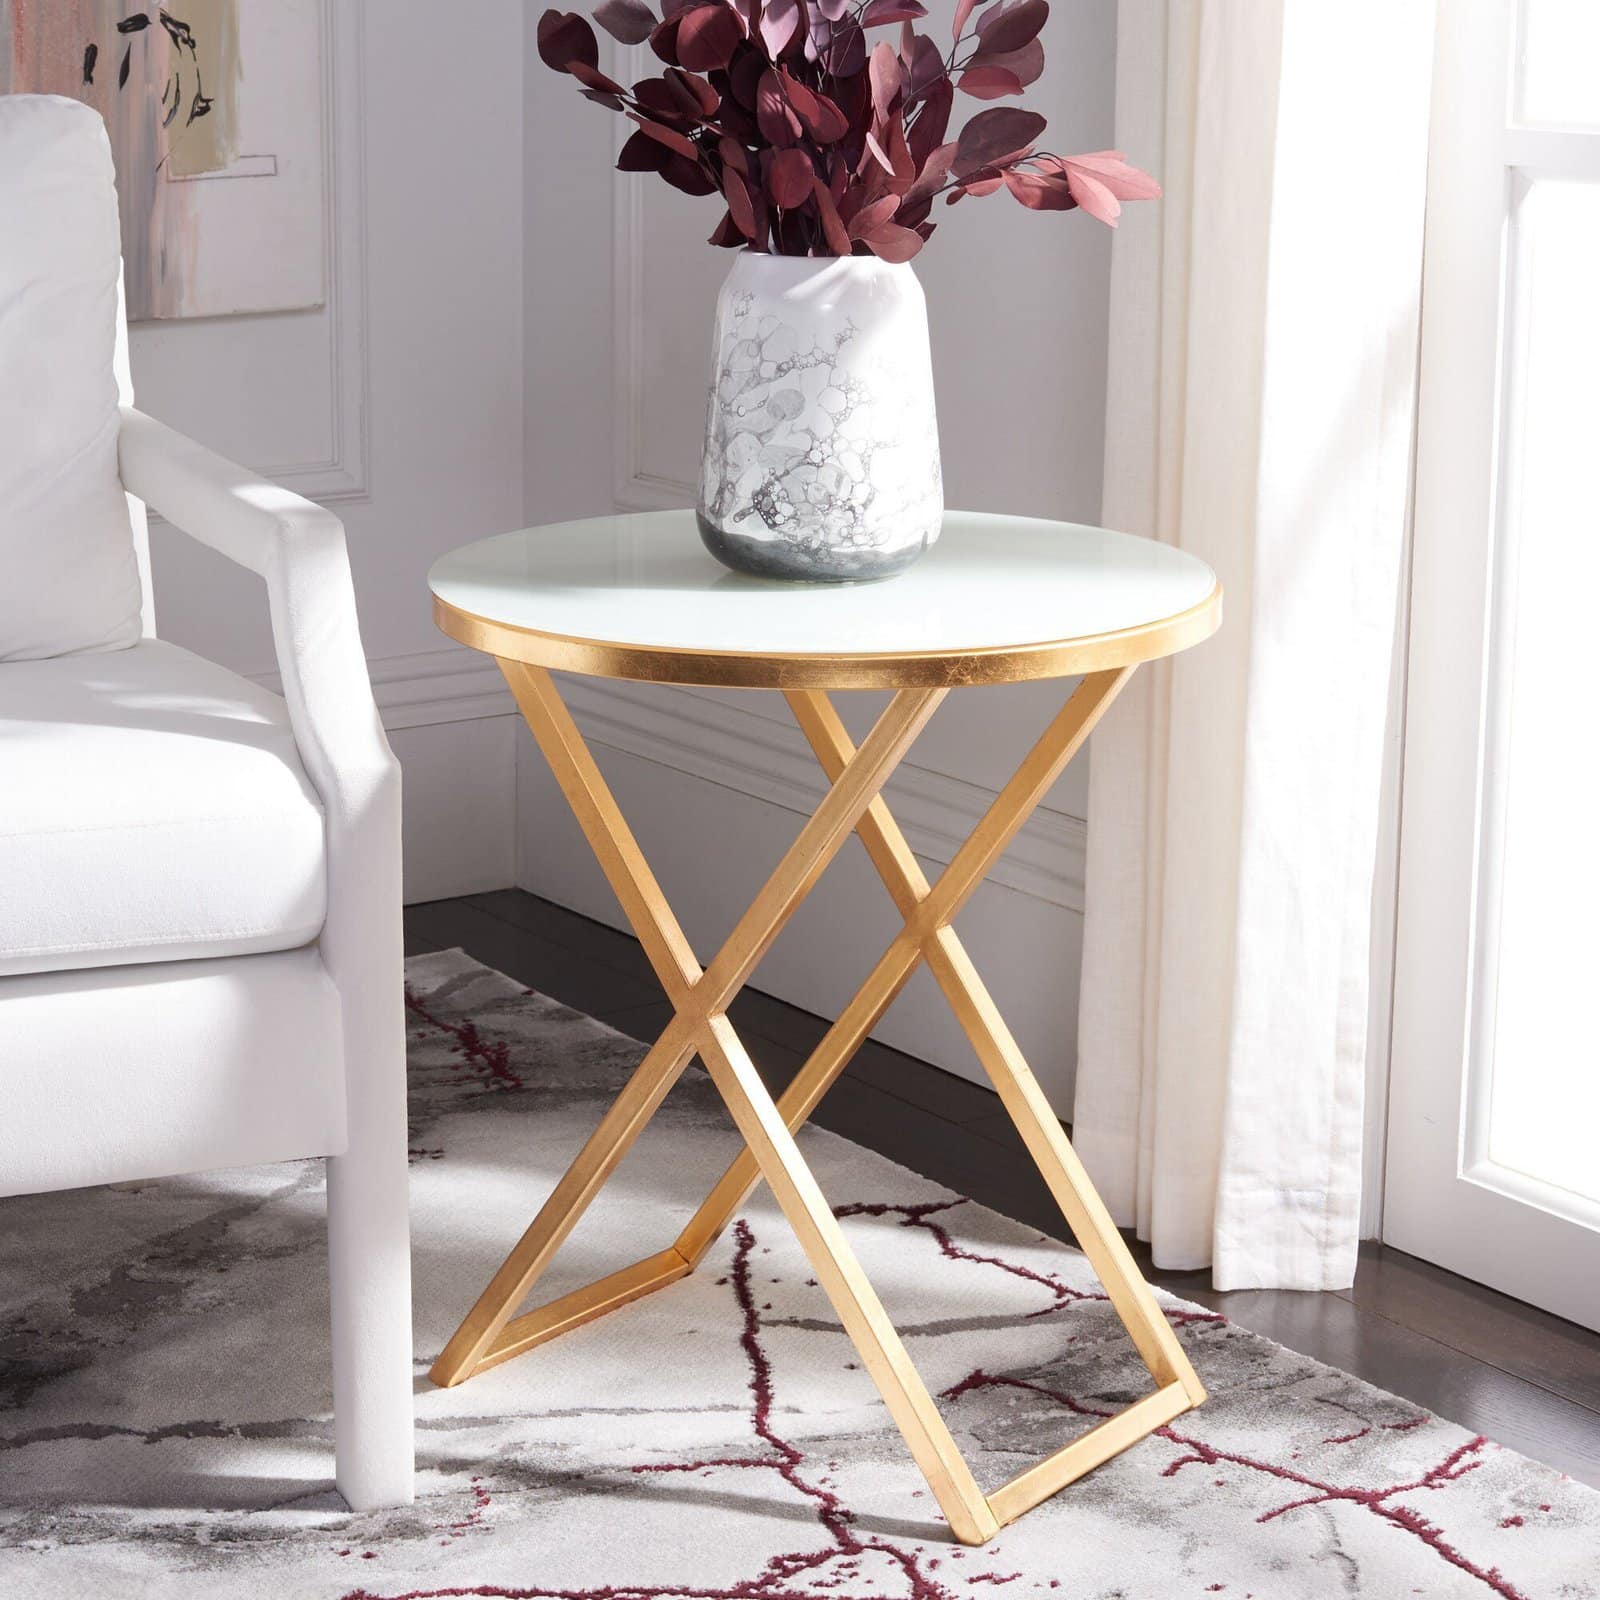 Try an Eye-Catching Gold Table